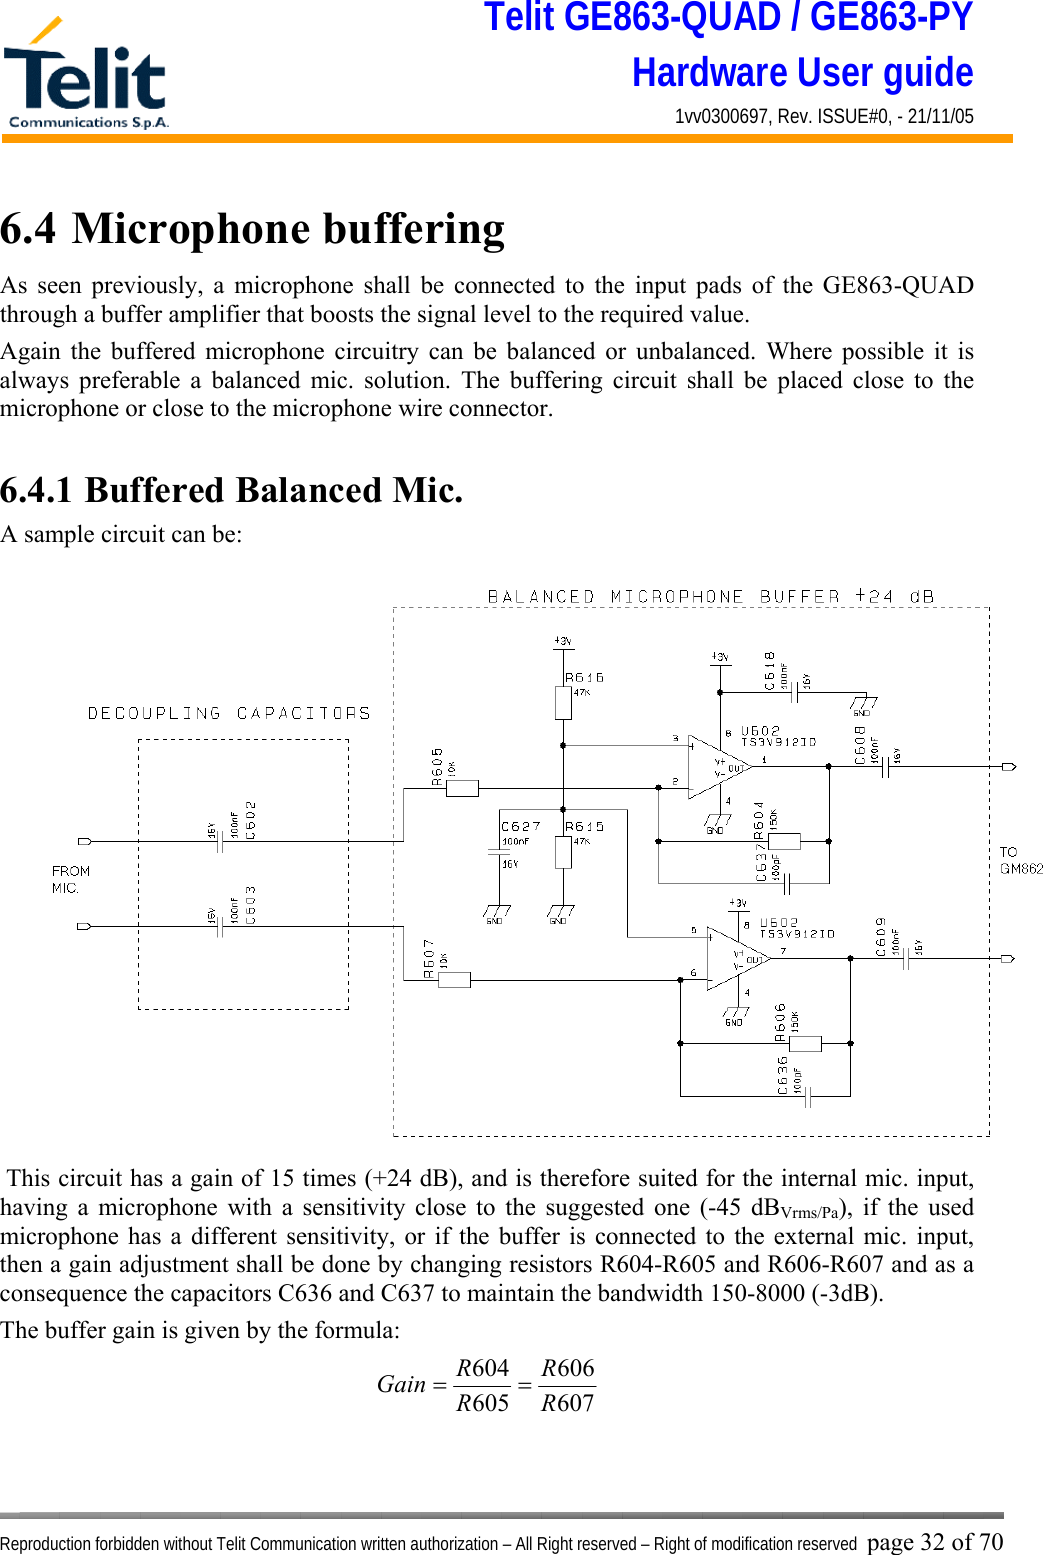 Telit GE863-QUAD / GE863-PY Hardware User guide 1vv0300697, Rev. ISSUE#0, - 21/11/05    Reproduction forbidden without Telit Communication written authorization – All Right reserved – Right of modification reserved page 32 of 70 6.4  Microphone buffering As seen previously, a microphone shall be connected to the input pads of the GE863-QUAD through a buffer amplifier that boosts the signal level to the required value. Again the buffered microphone circuitry can be balanced or unbalanced. Where possible it is always preferable a balanced mic. solution. The buffering circuit shall be placed close to the microphone or close to the microphone wire connector.  6.4.1 Buffered Balanced Mic. A sample circuit can be:  This circuit has a gain of 15 times (+24 dB), and is therefore suited for the internal mic. input, having a microphone with a sensitivity close to the suggested one (-45 dBVrms/Pa), if the used microphone has a different sensitivity, or if the buffer is connected to the external mic. input, then a gain adjustment shall be done by changing resistors R604-R605 and R606-R607 and as a consequence the capacitors C636 and C637 to maintain the bandwidth 150-8000 (-3dB). The buffer gain is given by the formula: 607606605604RRRRGain ==   